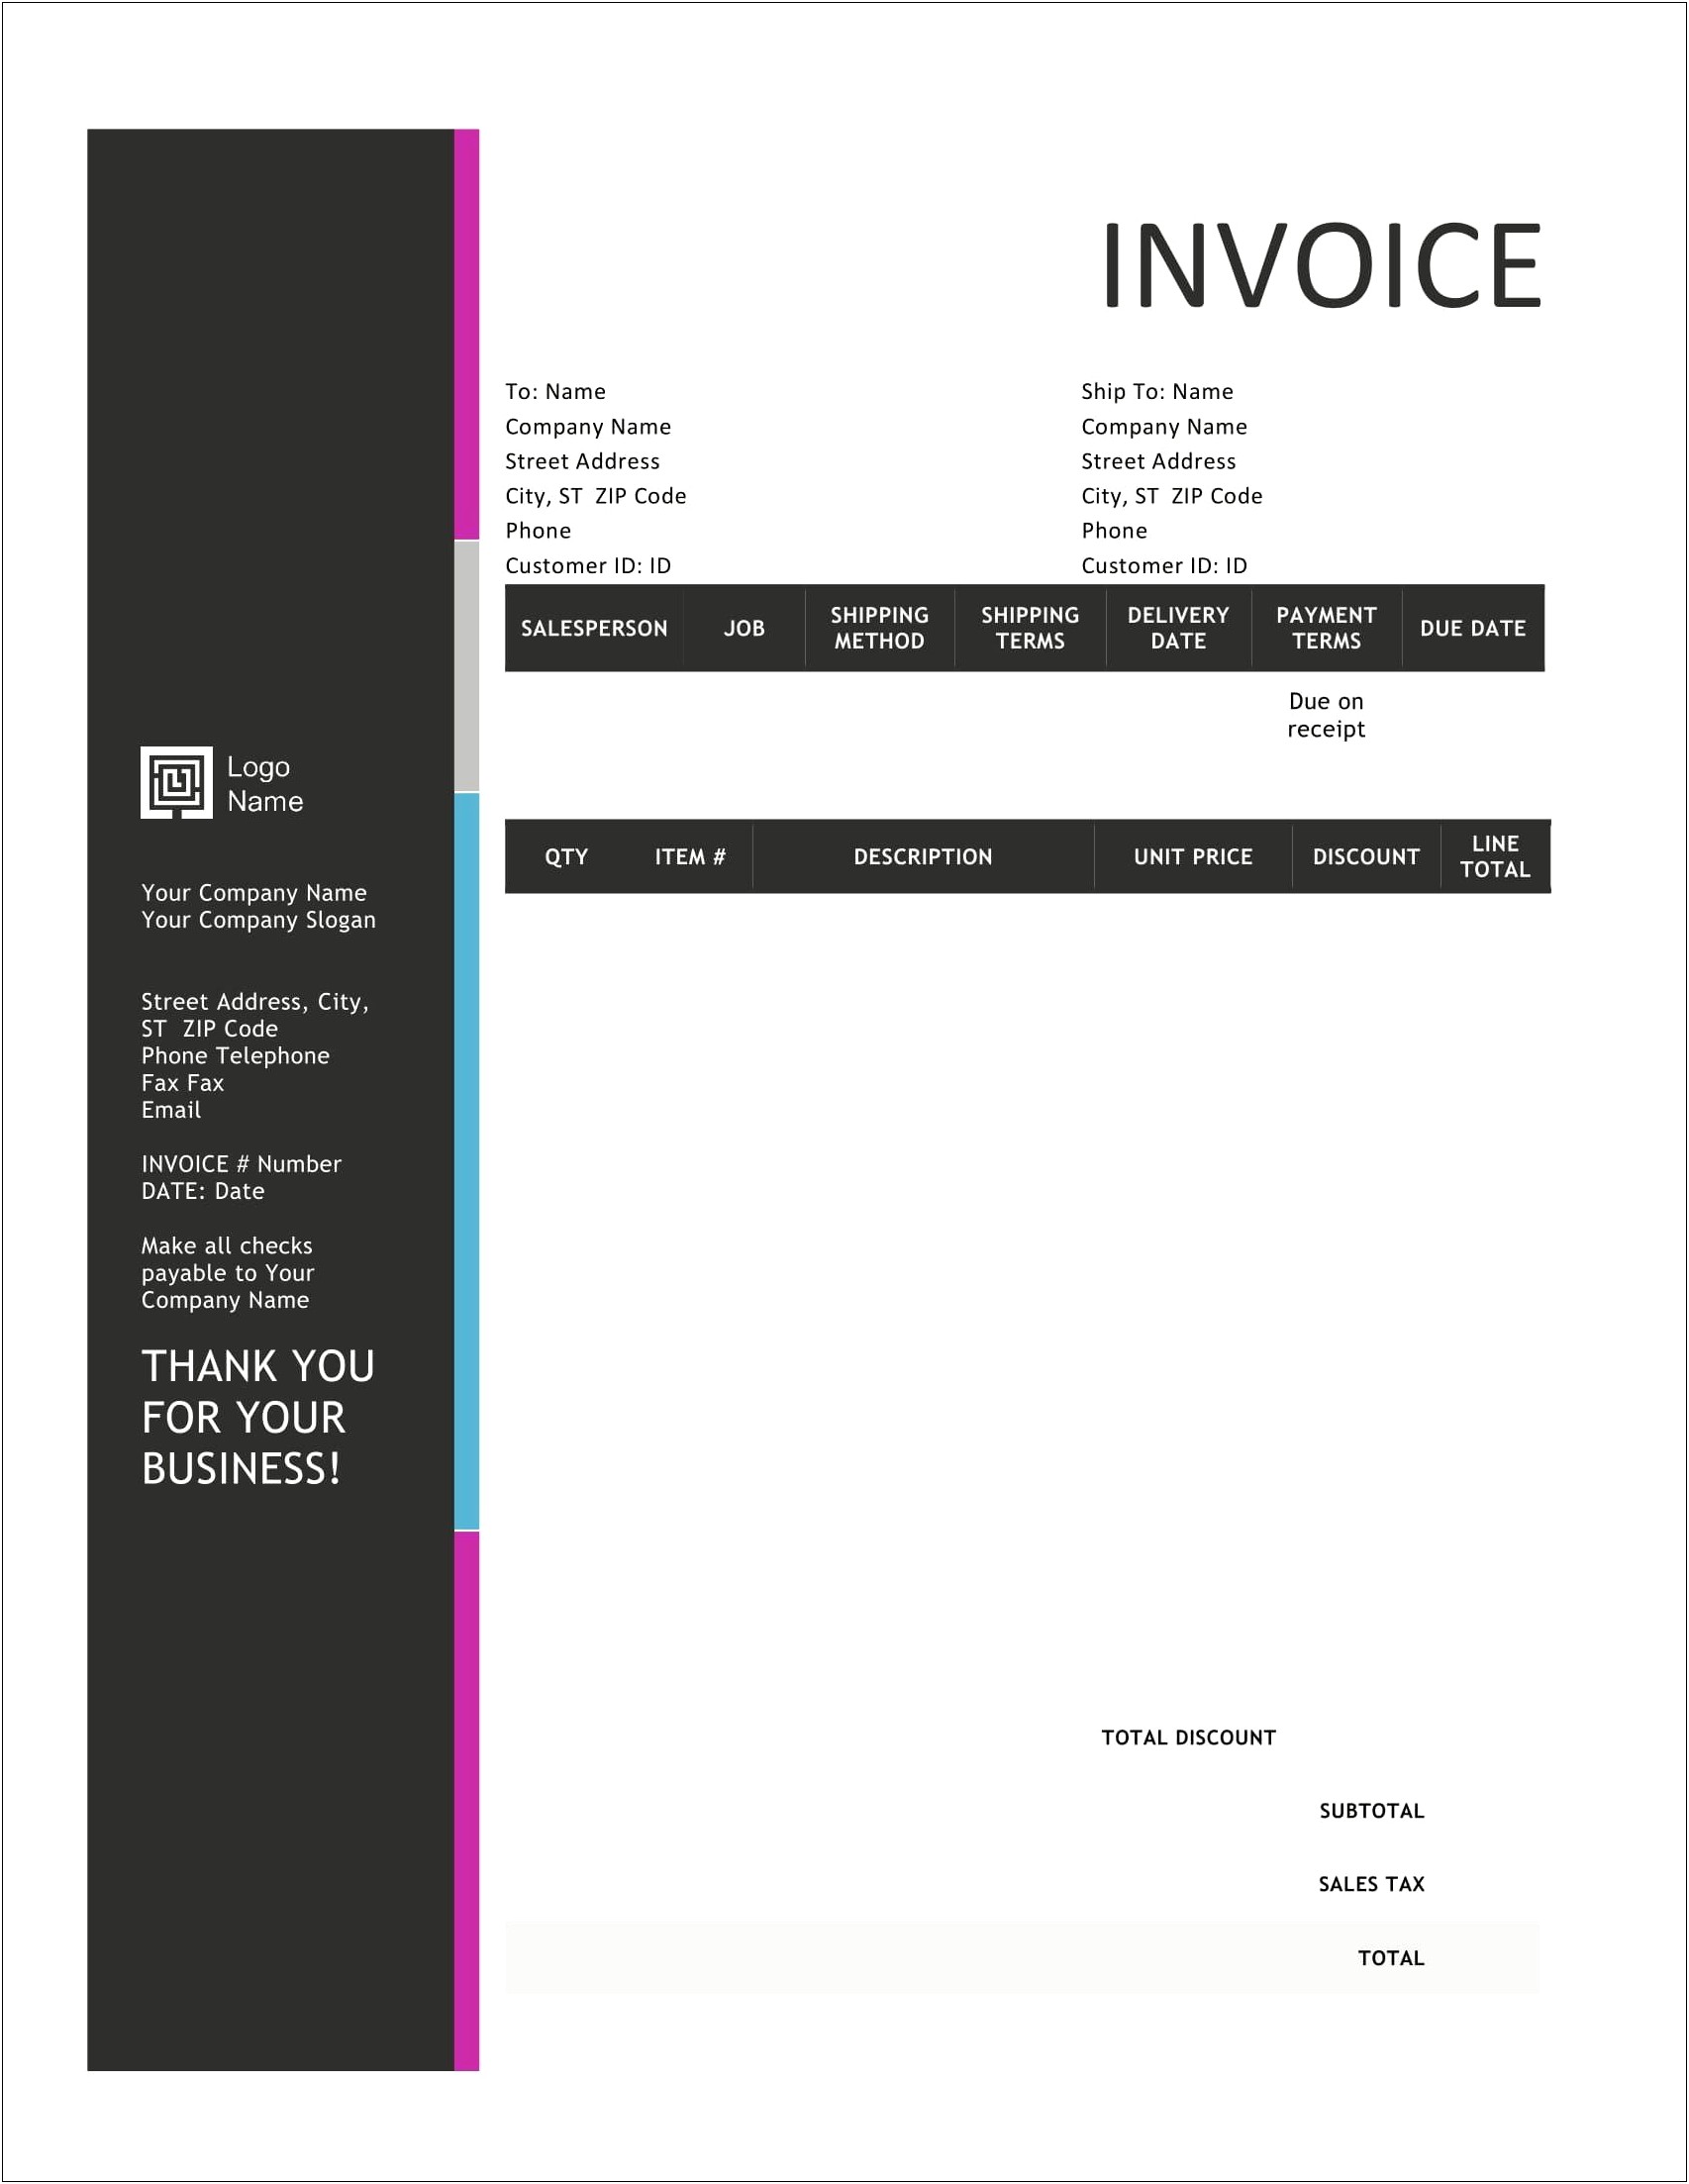 Sample Of An Invoice In Word Template